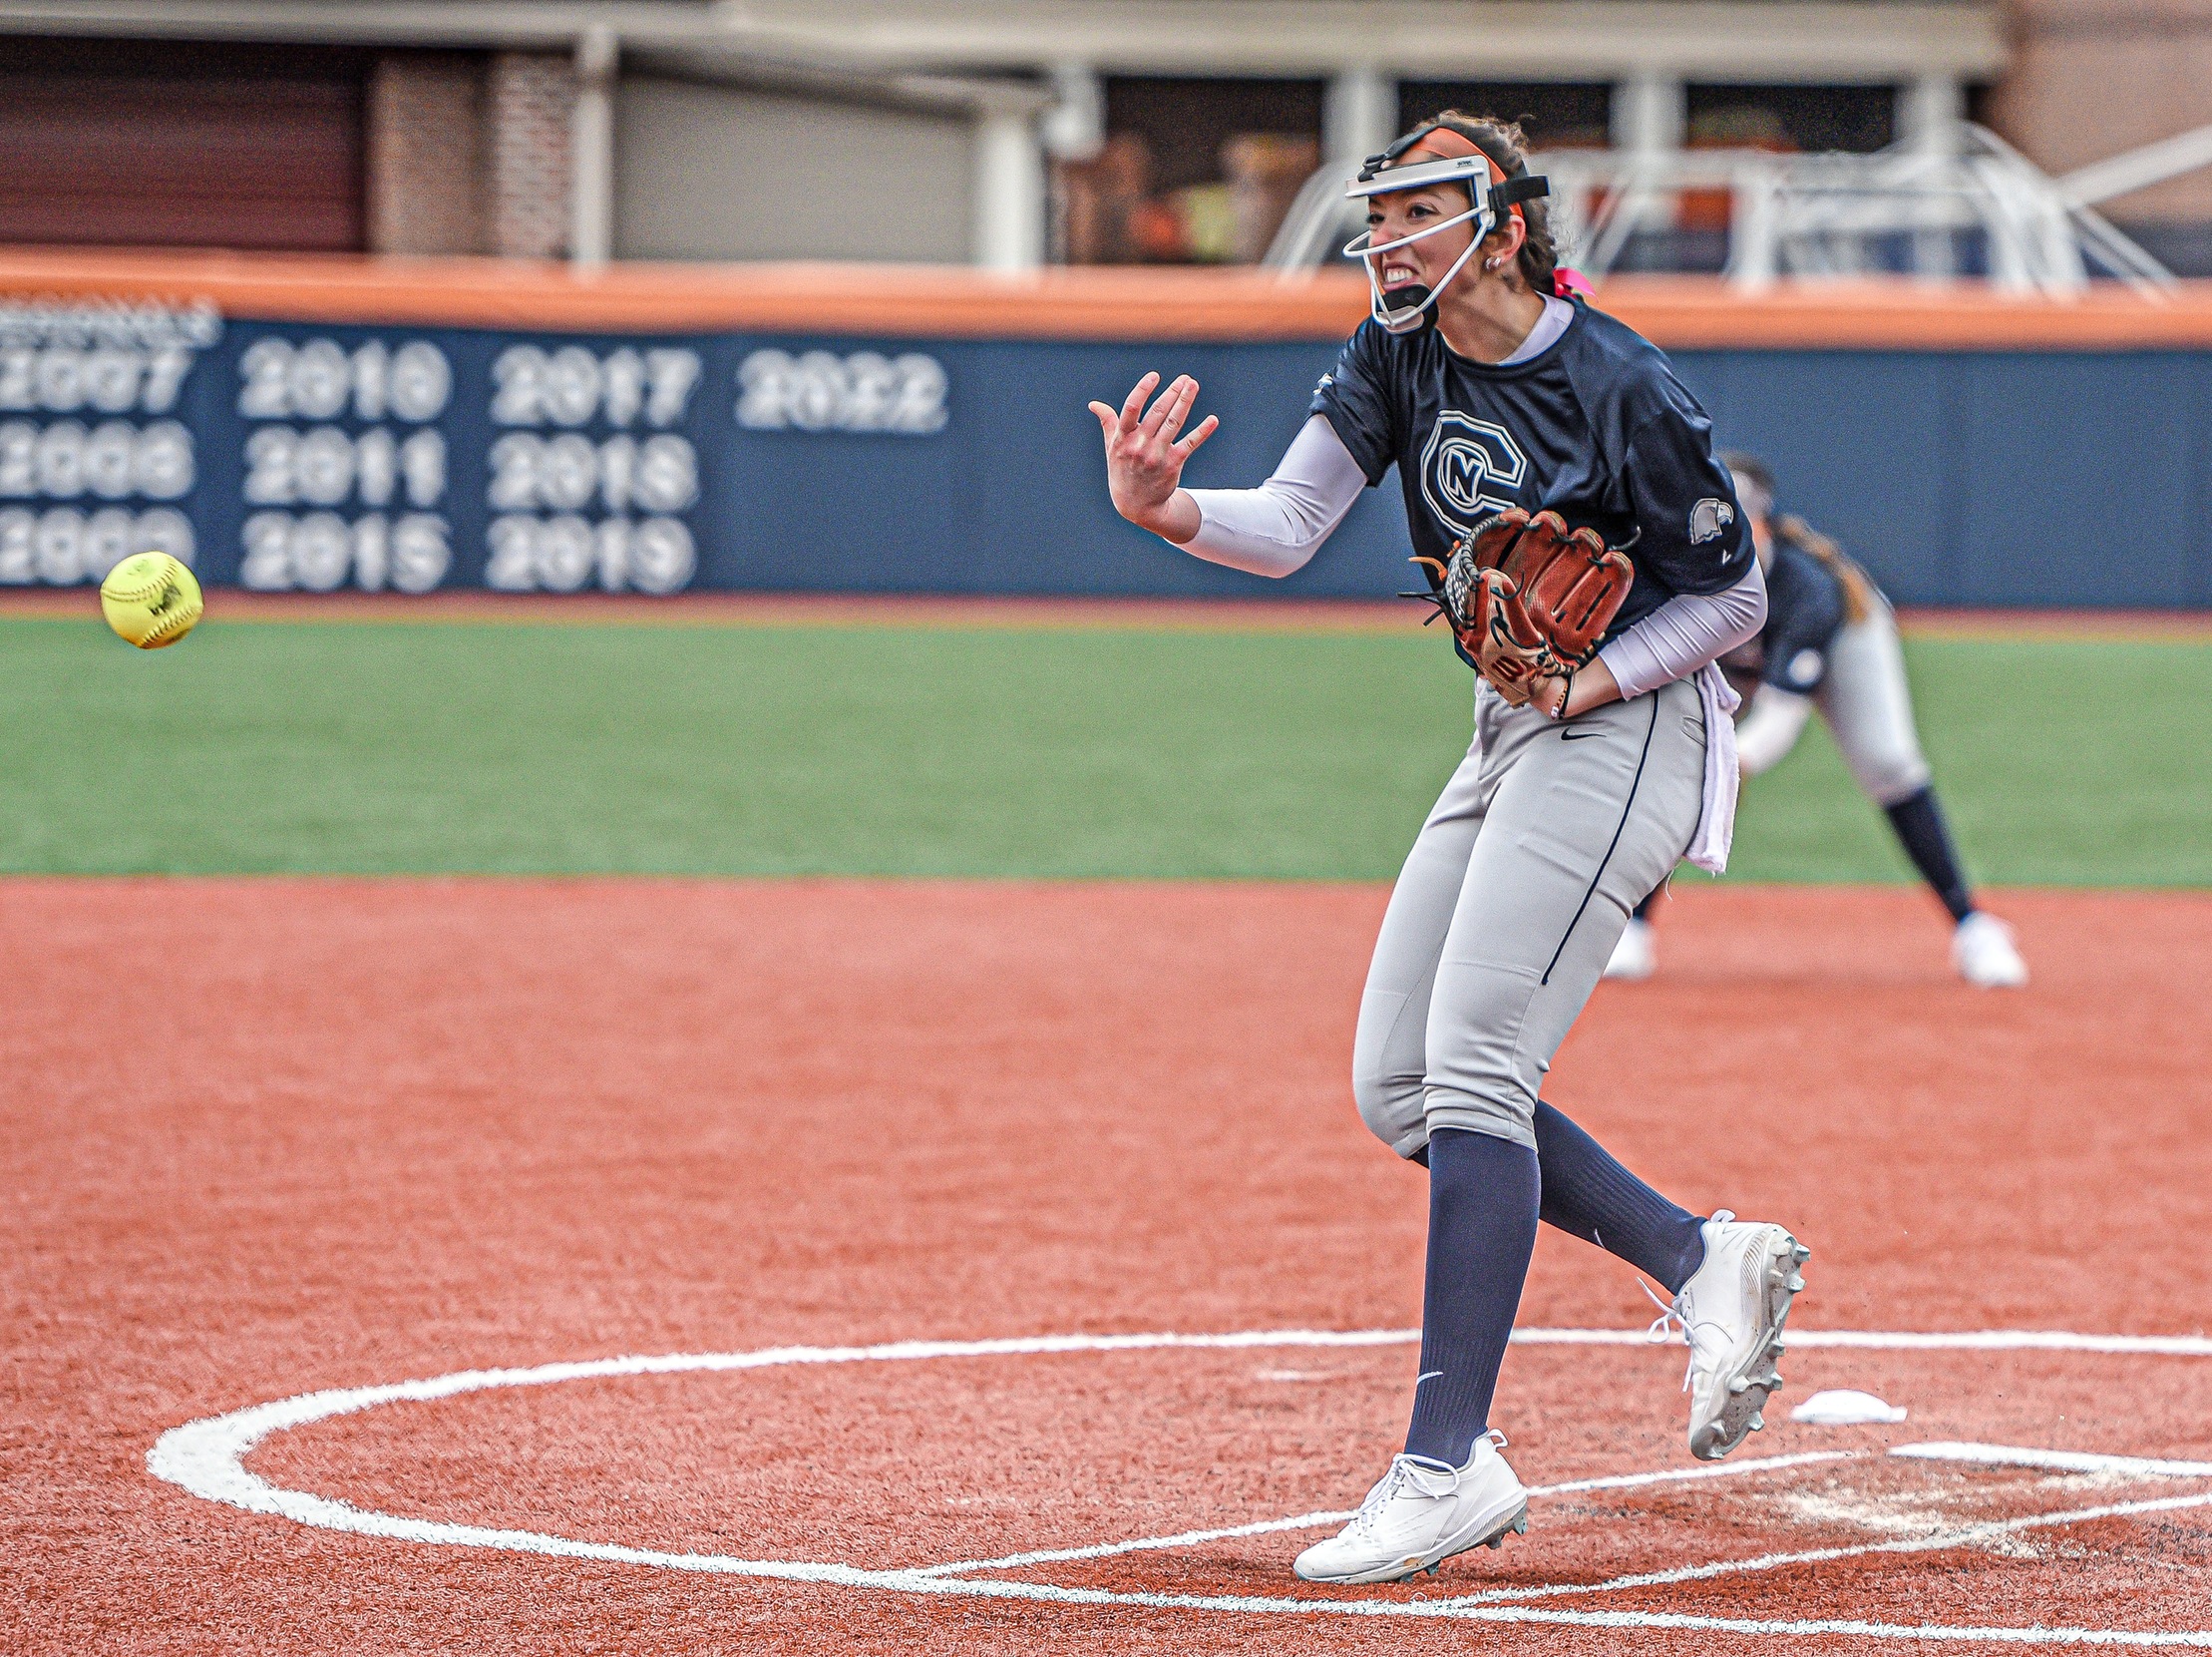 Eagles drop pair of pitchers duels on Day 2 of NFCA Leadoff Classic